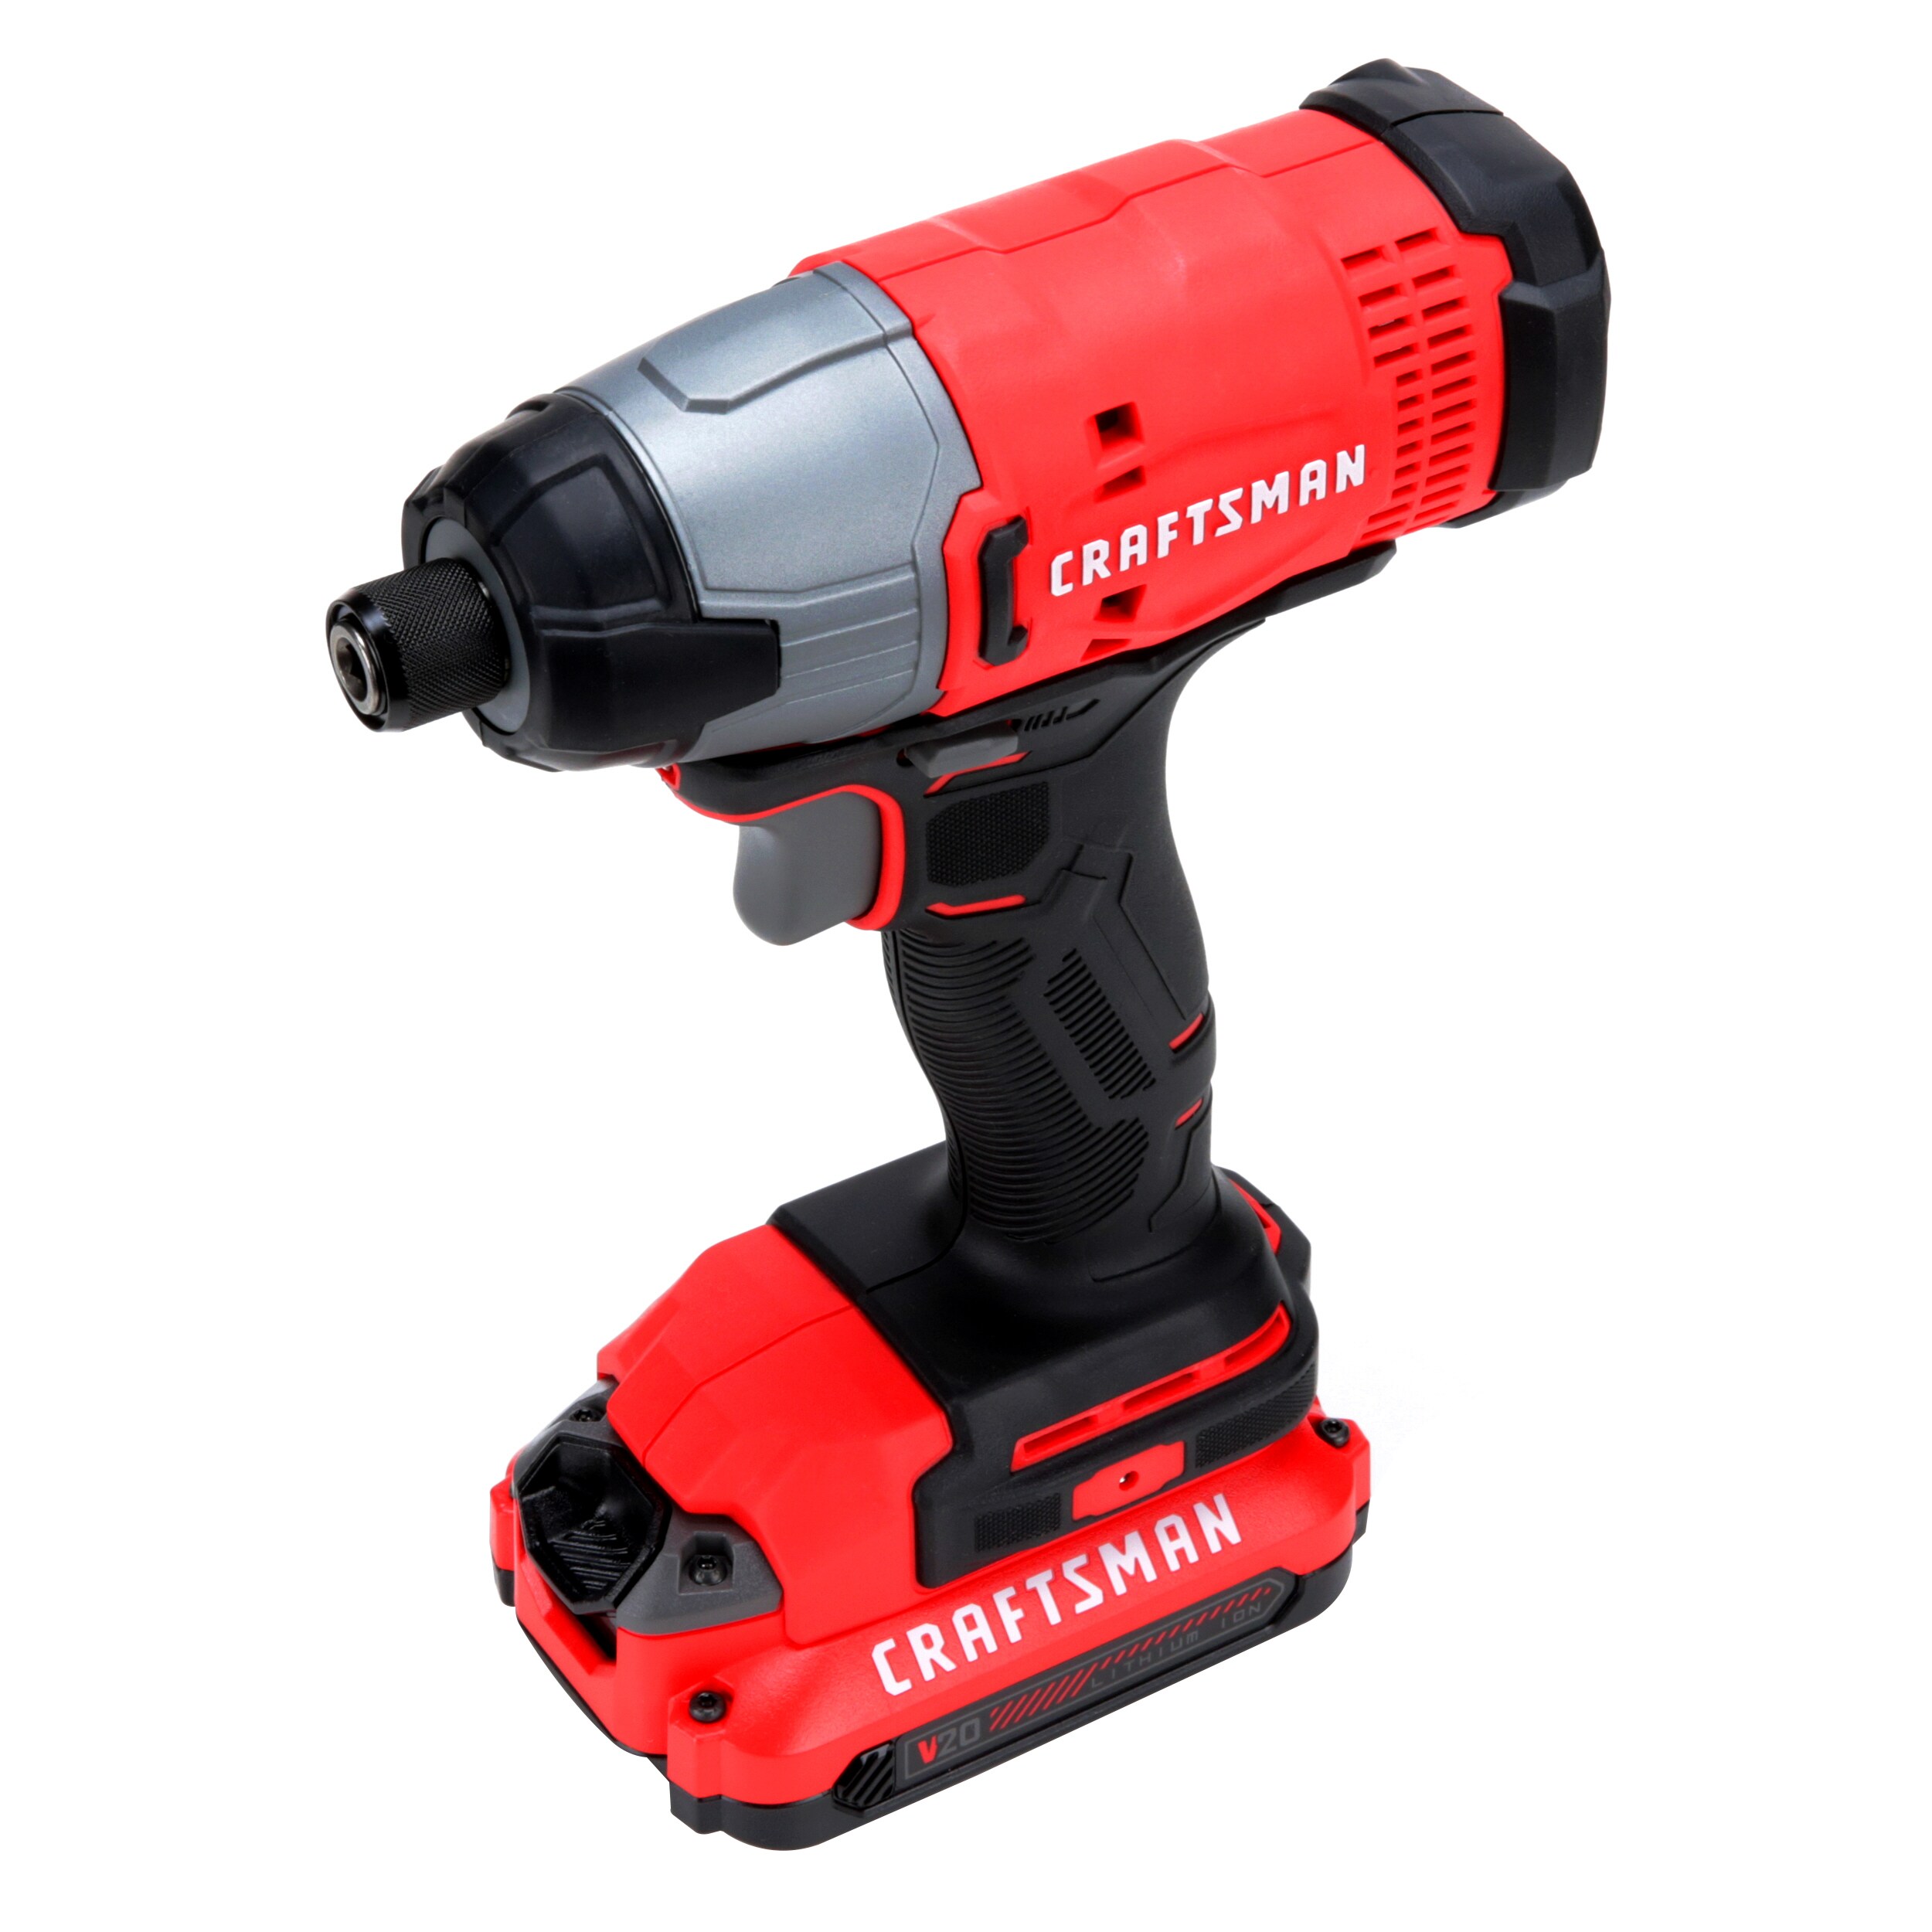 CRAFTSMAN V20 20-volt Max Variable Speed Cordless Impact Driver (2-Batteries Included)